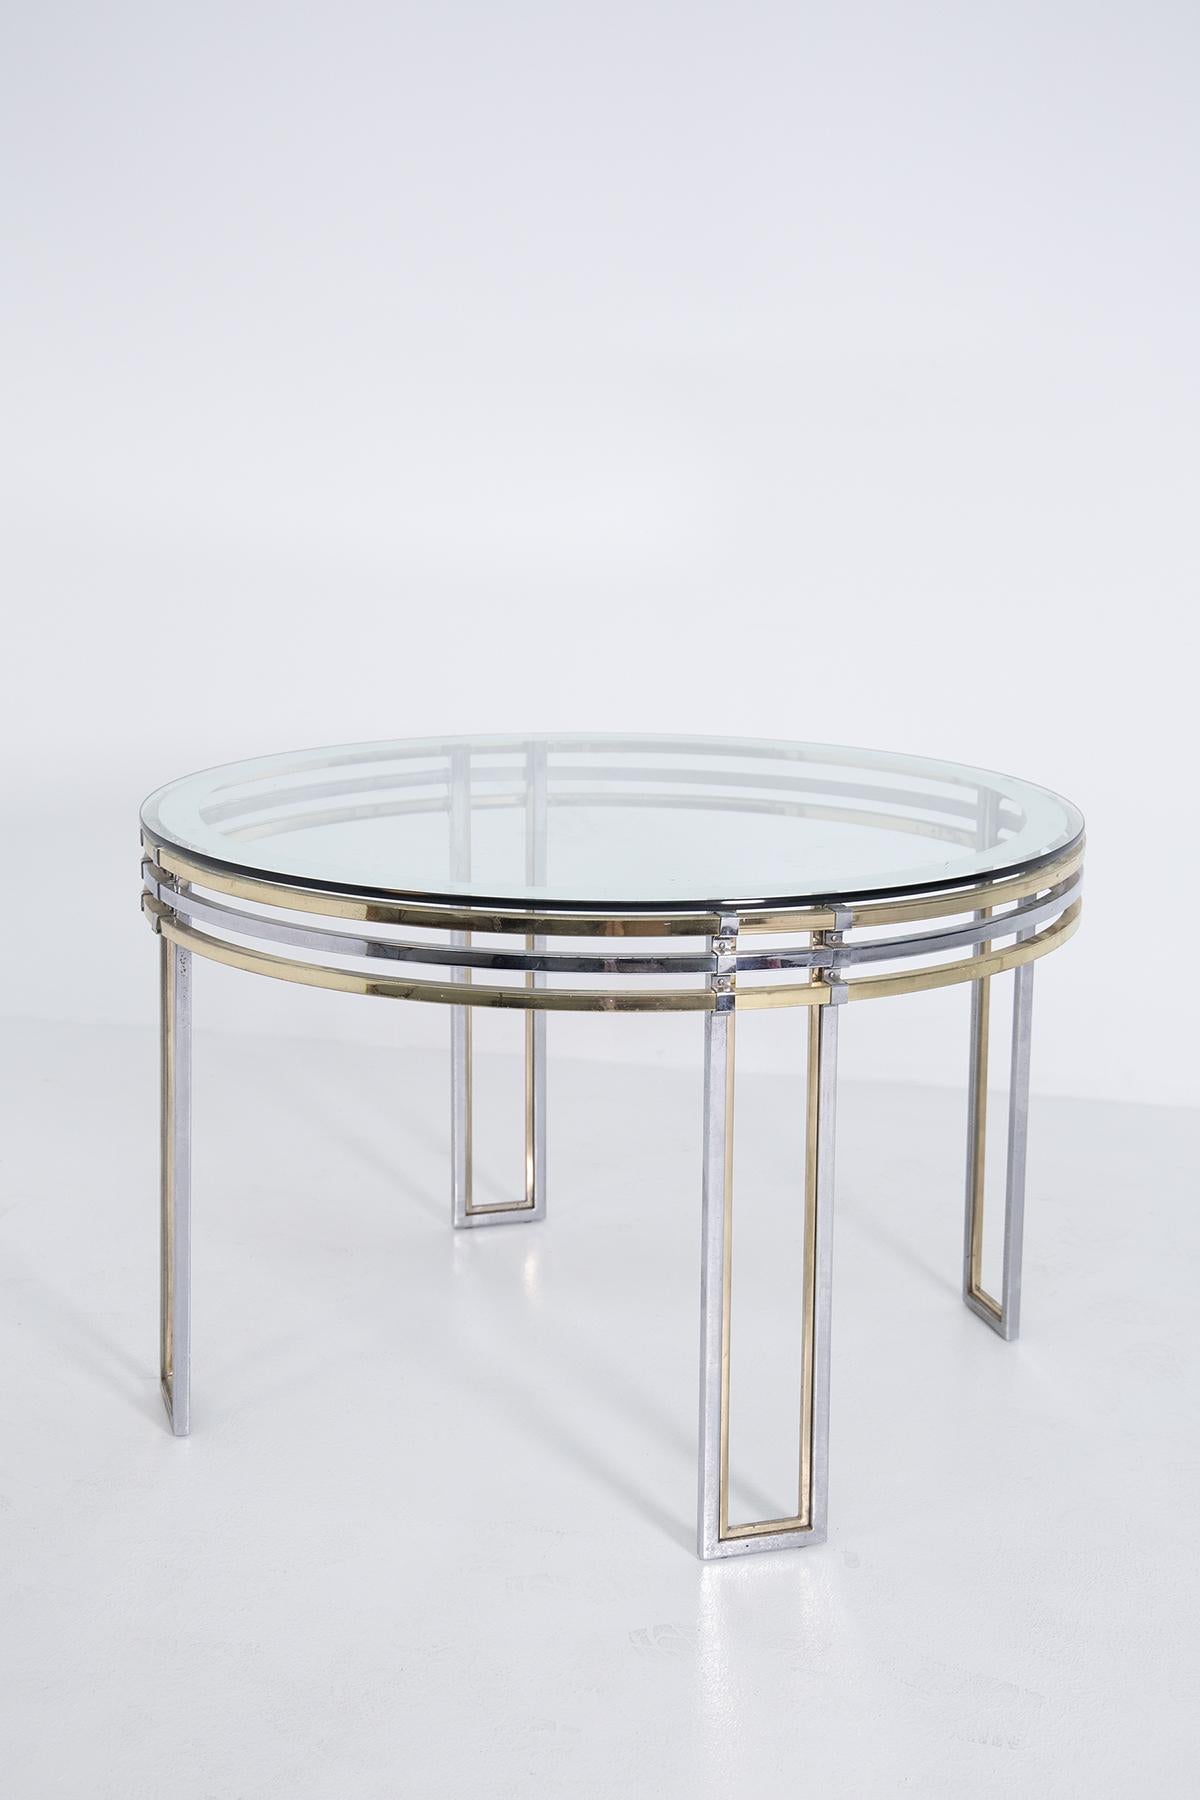 Geometric Italian round table by Romeo Rega from the 1970s.
Romeo Rega's Italian table is made of brass and steel slats.
Its elegant beauty given by its cleverly spaced brass and steel brackets make this product very sophisticated and accurate in